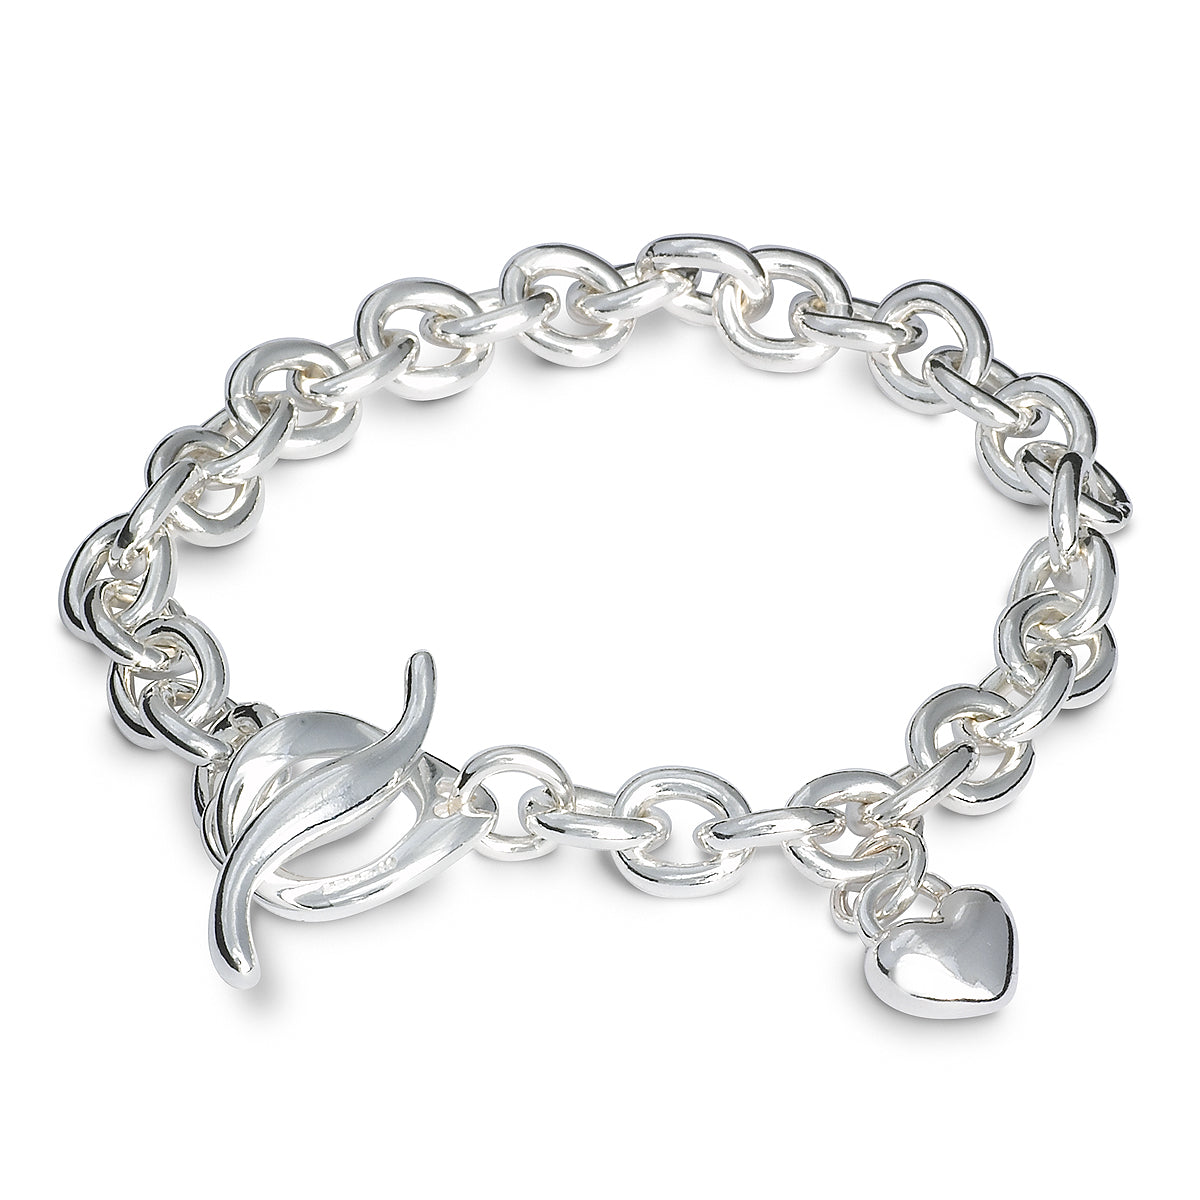 Traditional style designer silver charm bracelet with T-bar clasp Scarlett Jewellery